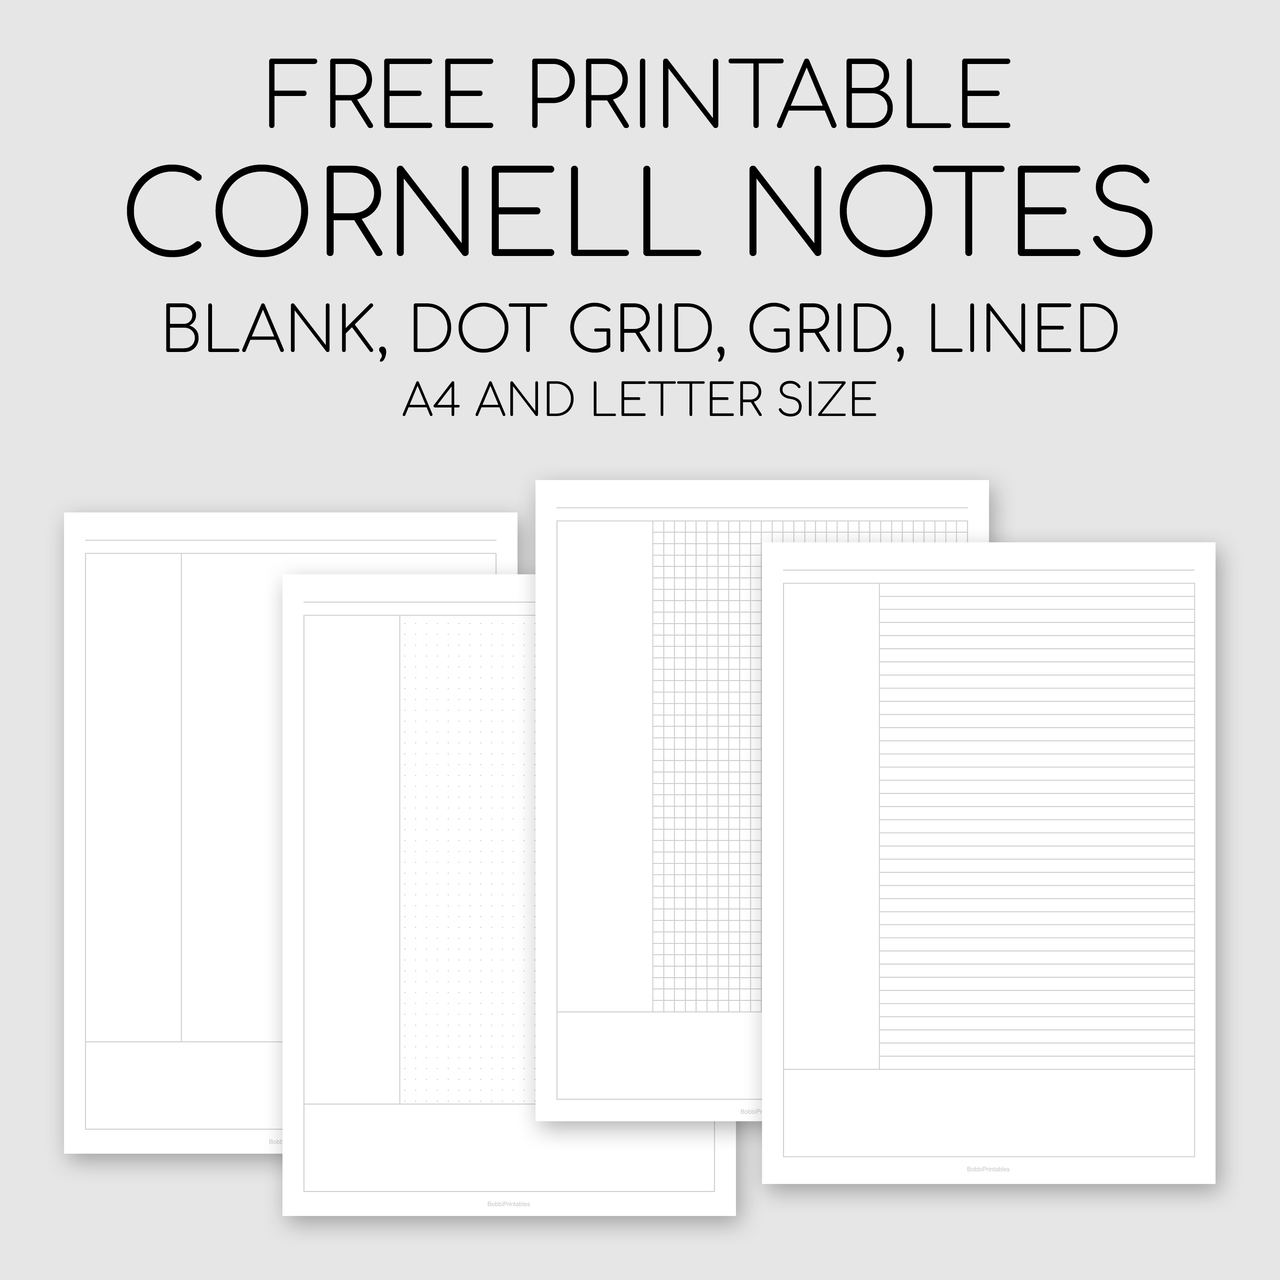 Bobbiprintables Free Printable Cornell Notes Template Download